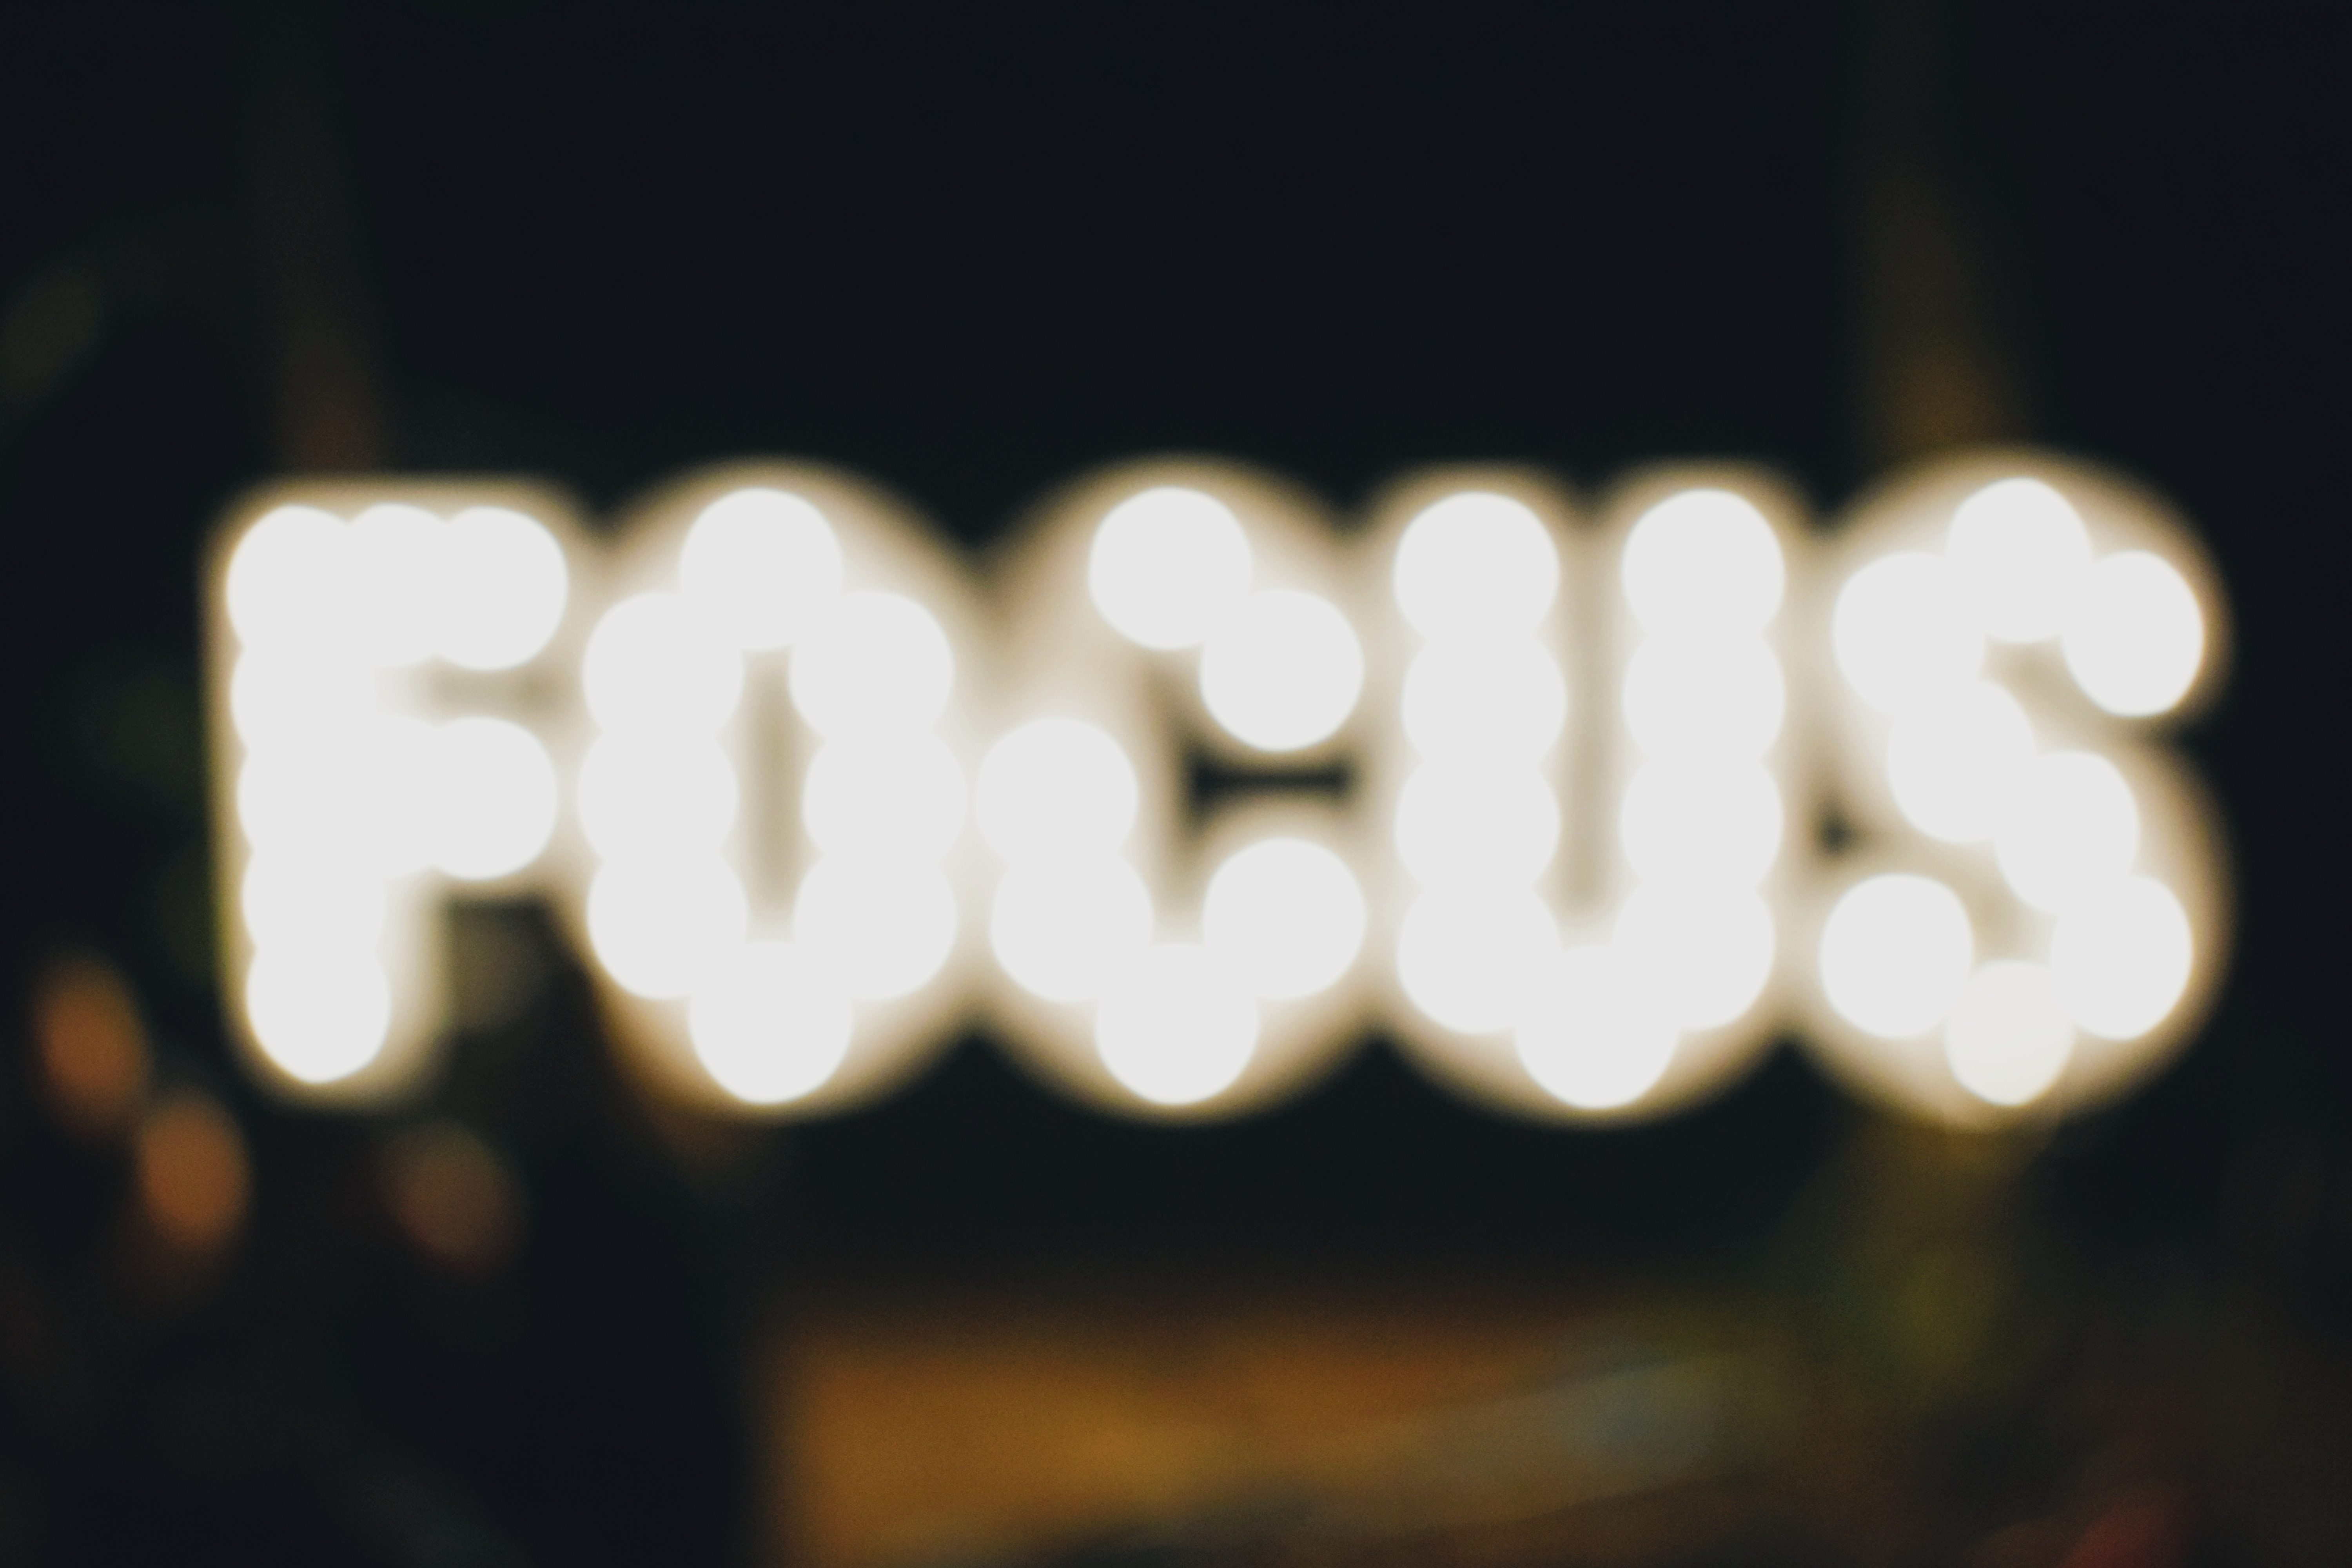 Blurry white text on black background that says "FOCUS"